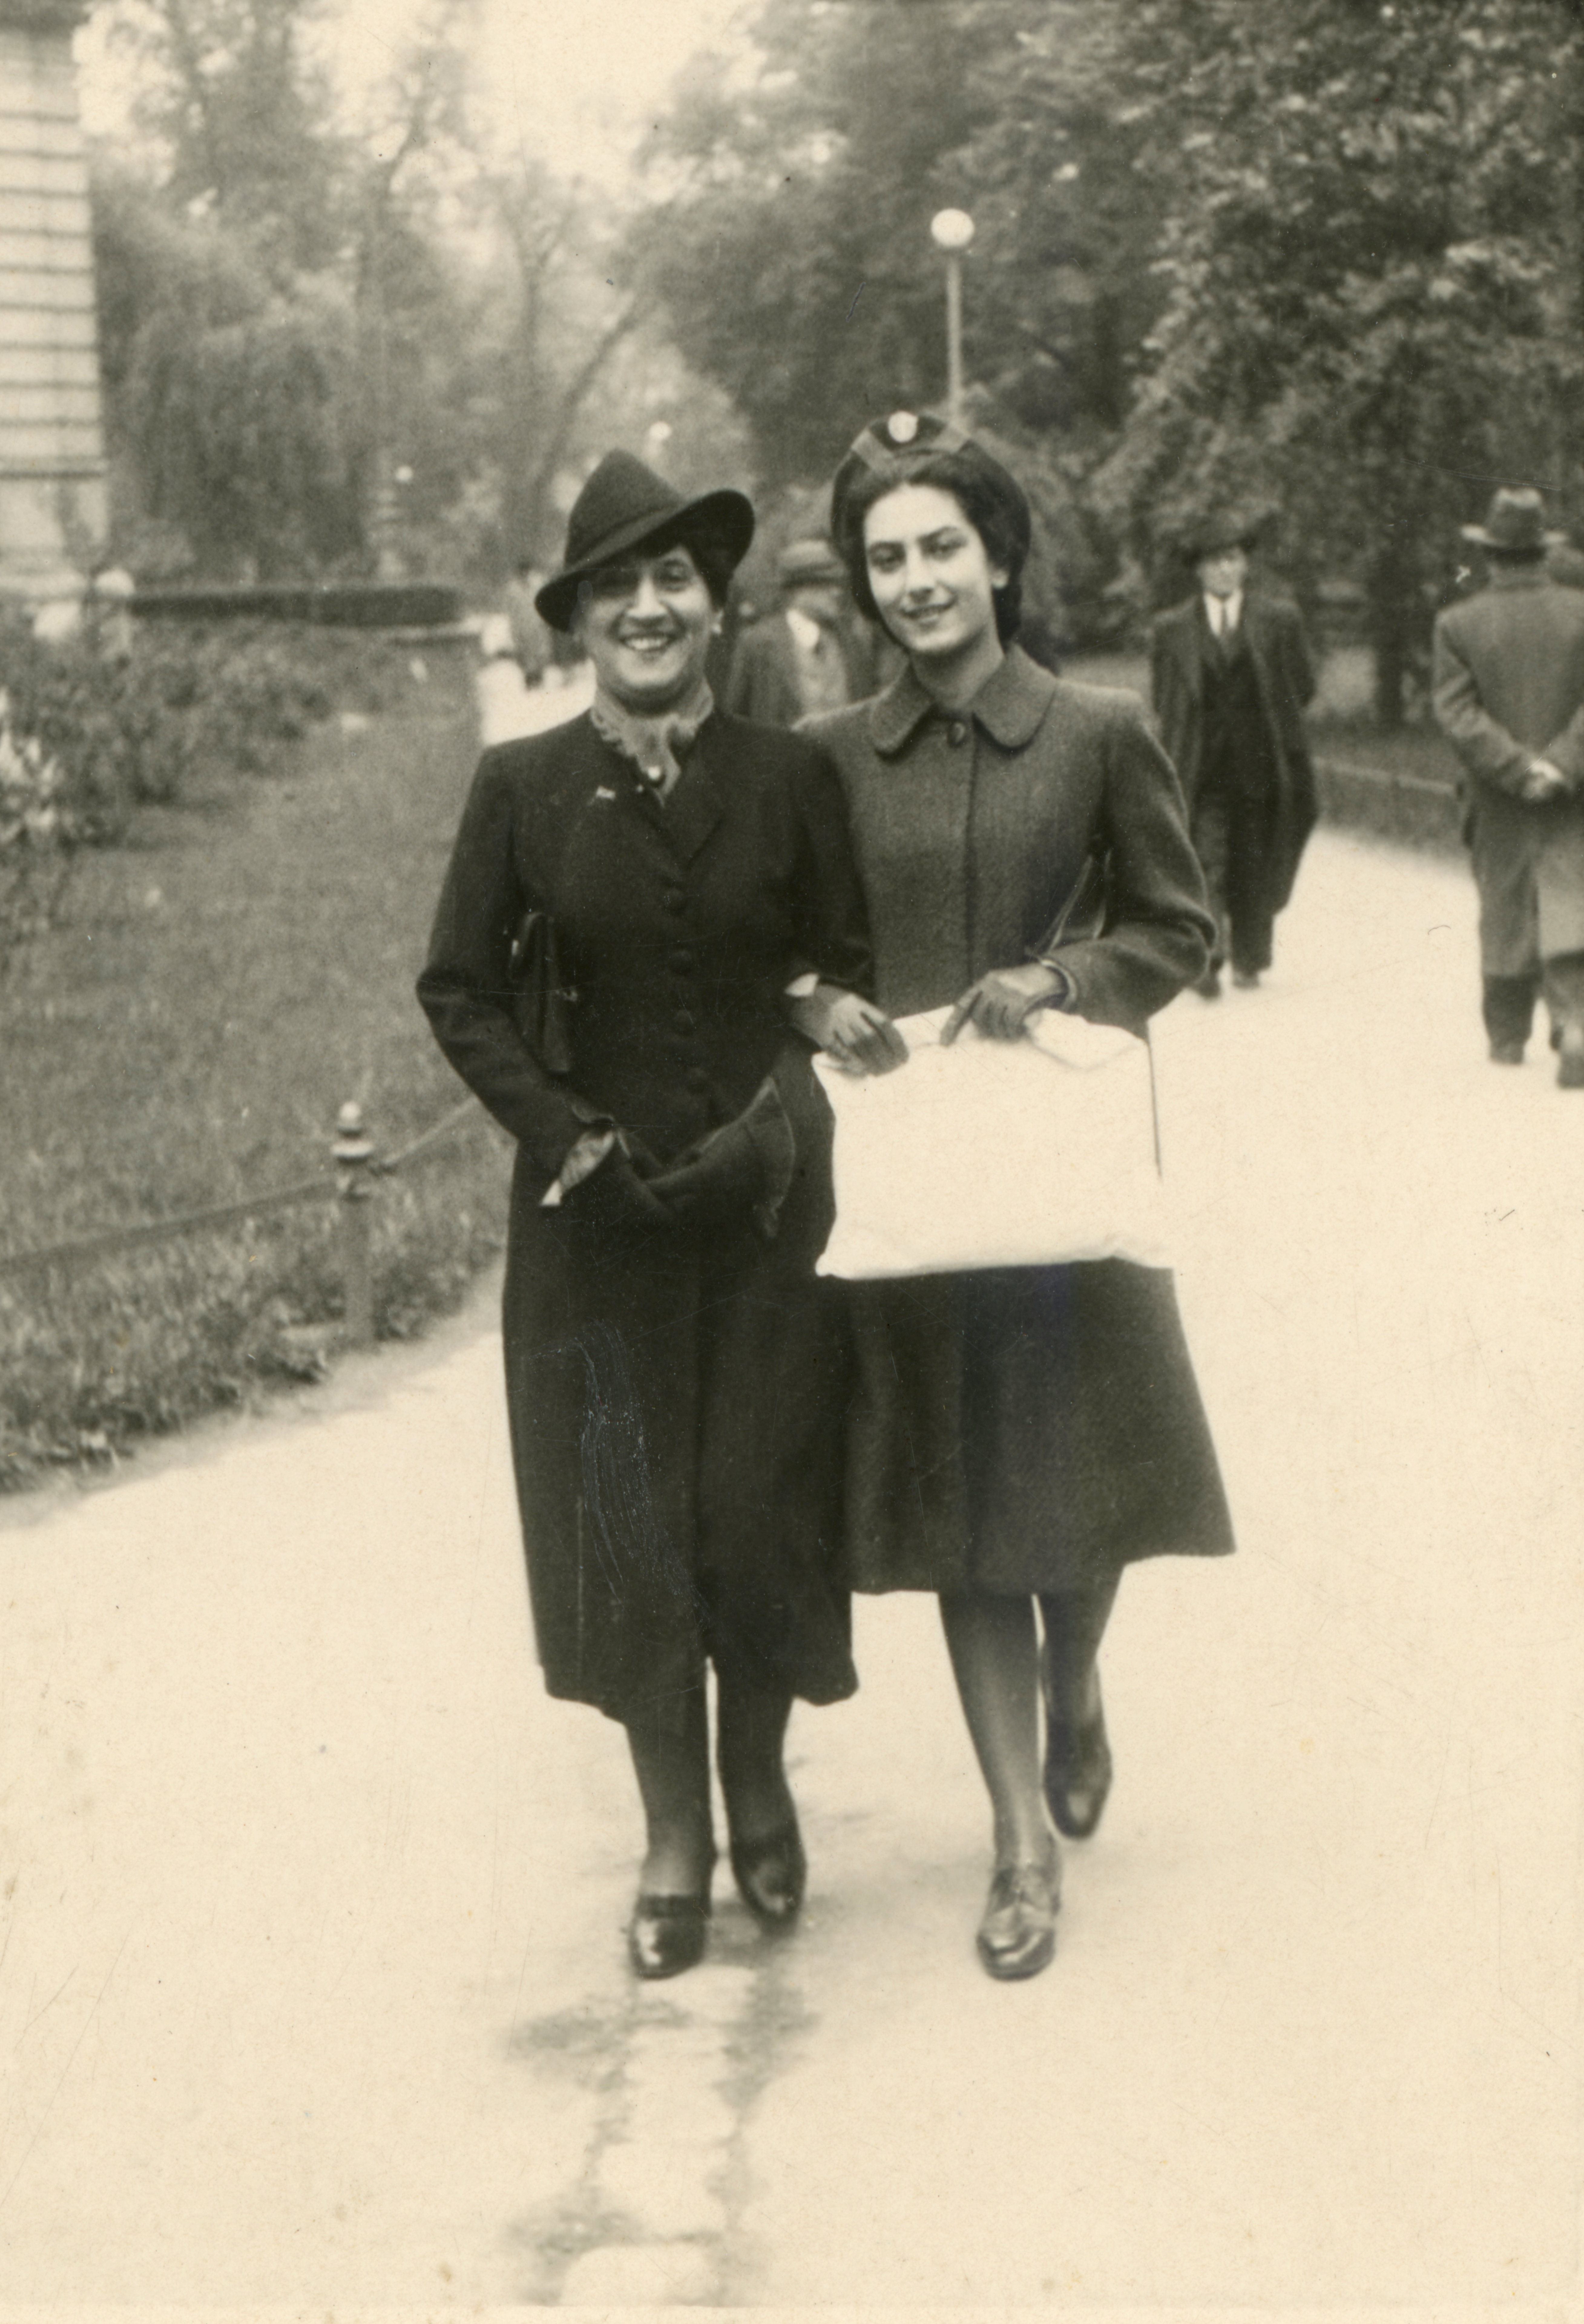 My mother, Irena Goldberger, walking with her her mother, Teofila, to the dressmaker, May 1939. This is the last photo taken of them before WWII.